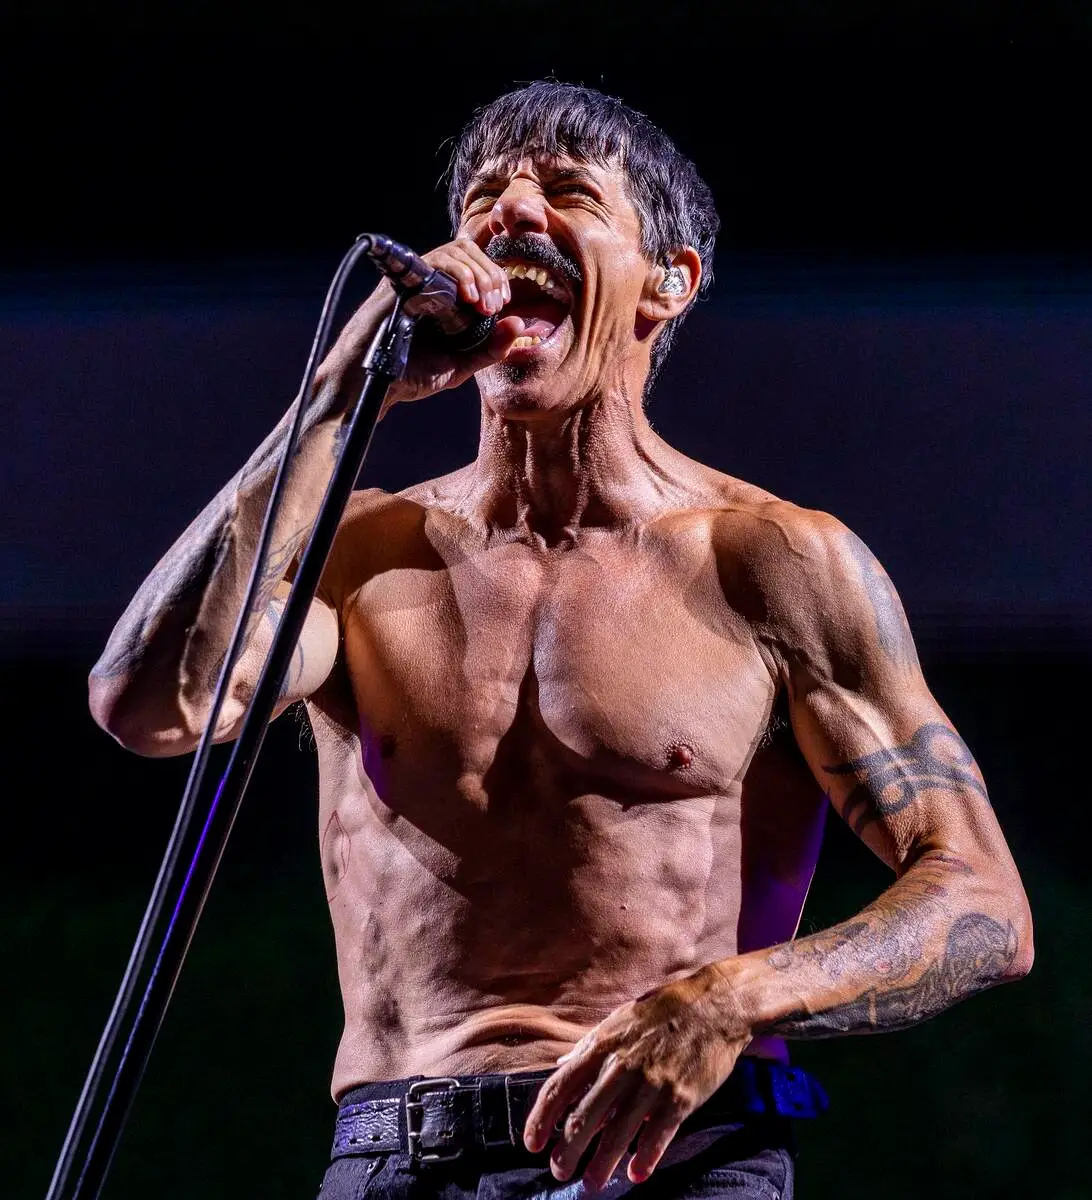 Who Is The Lead Singer Of Red Hot Chili Peppers?